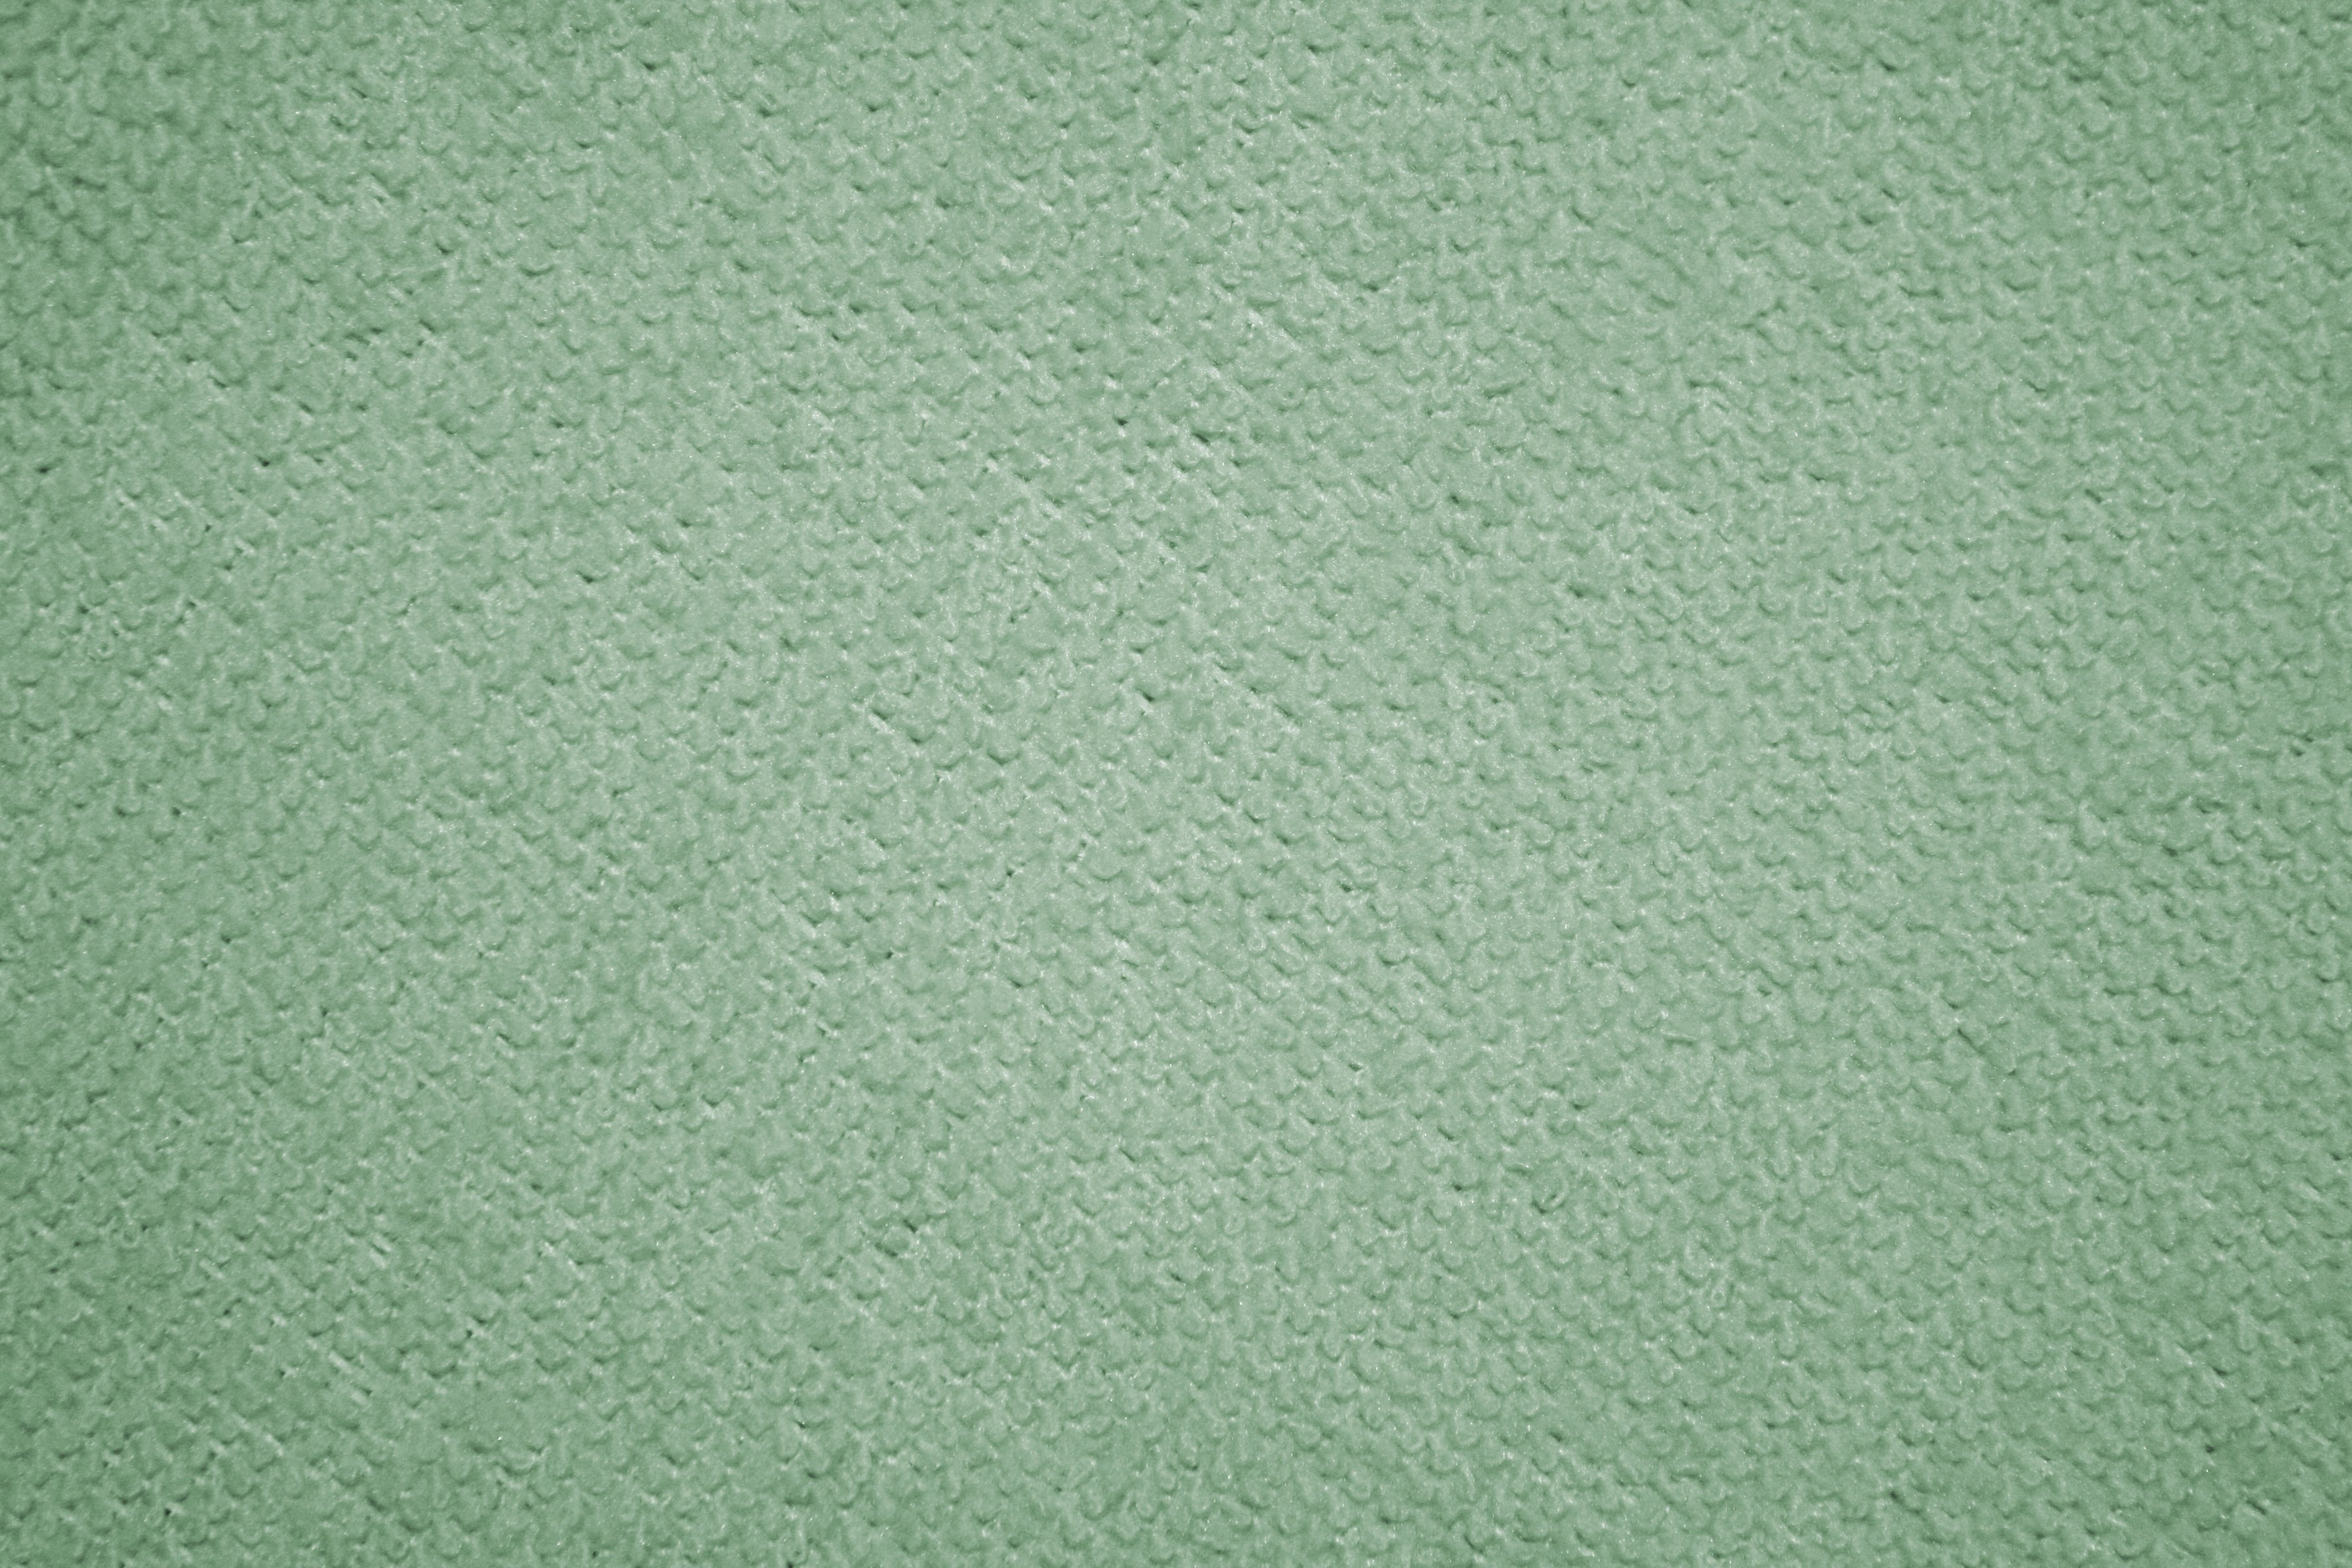 Sage Green Microfiber Cloth Fabric Texture Picture Free Photograph